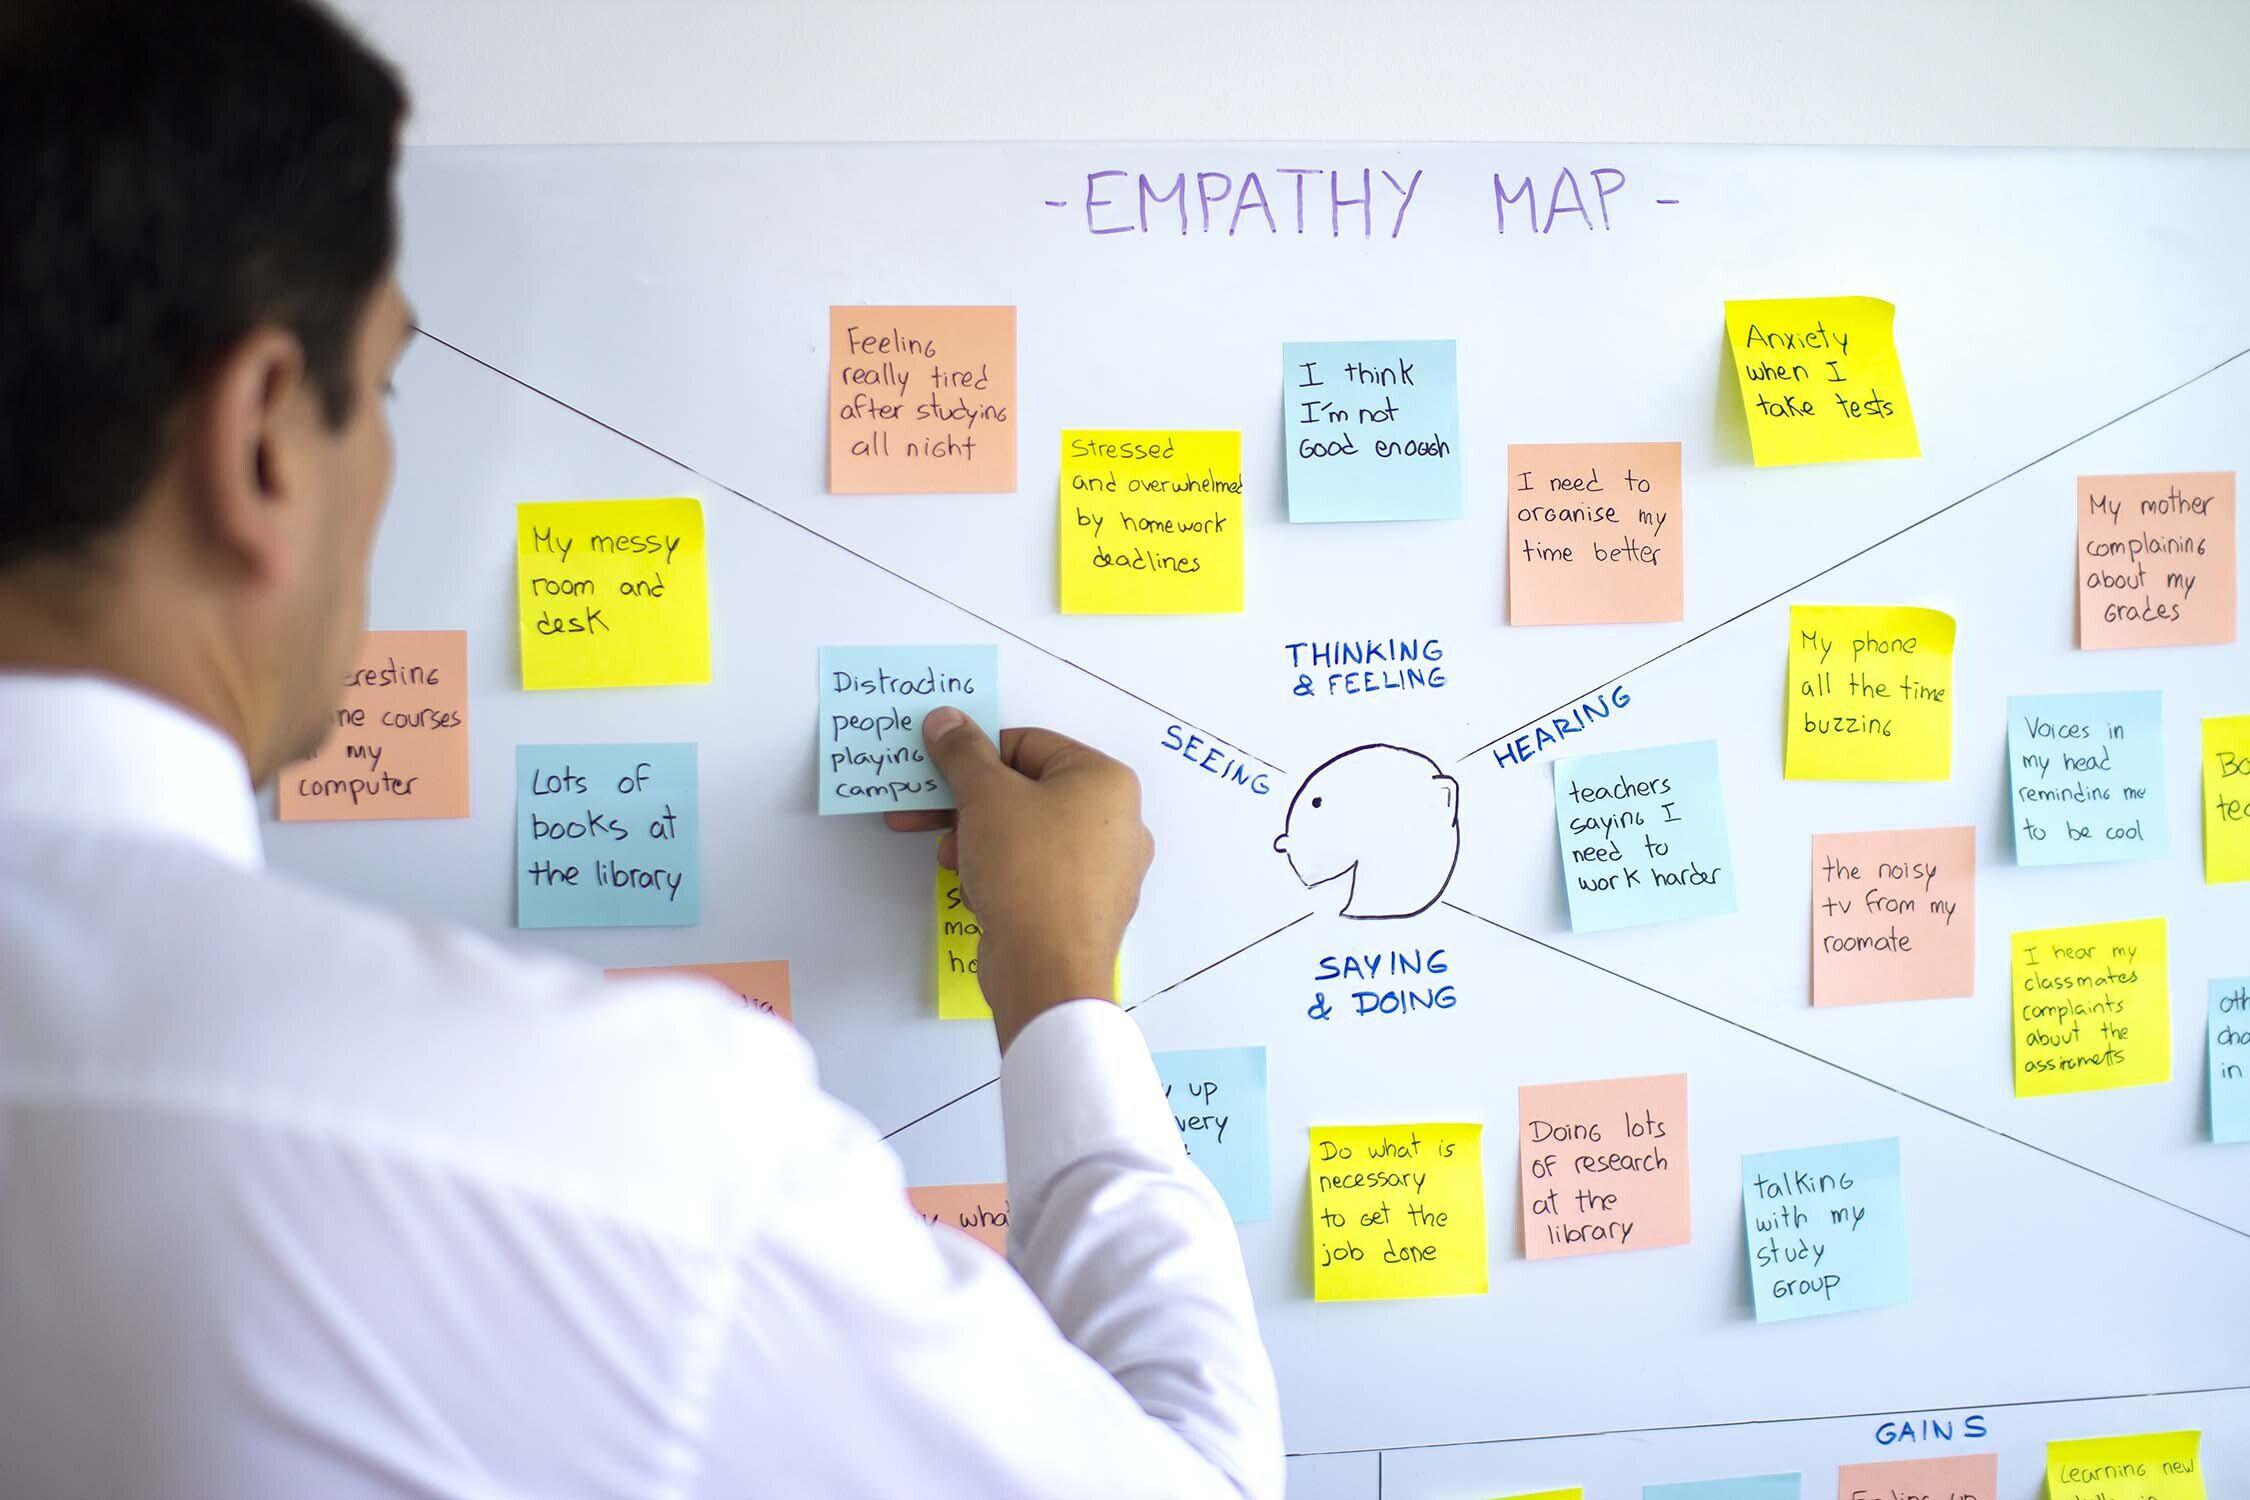 Man sticking a post-it note on an empathy mapping template